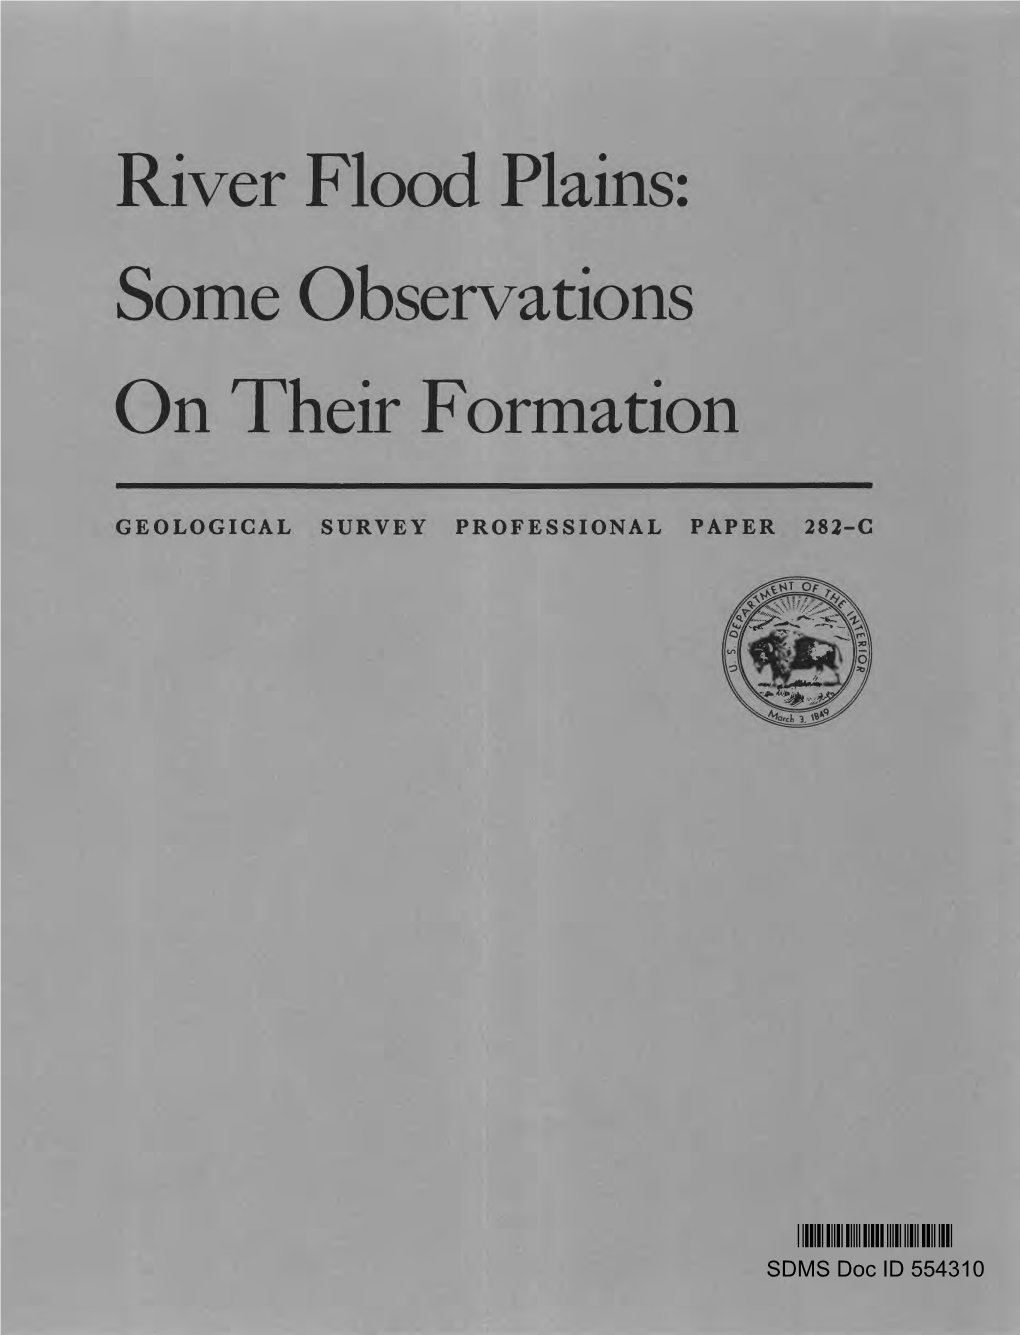 River Flood Plains: Some Observations on Their Formation, Geological Survey Professional Paper 282-C